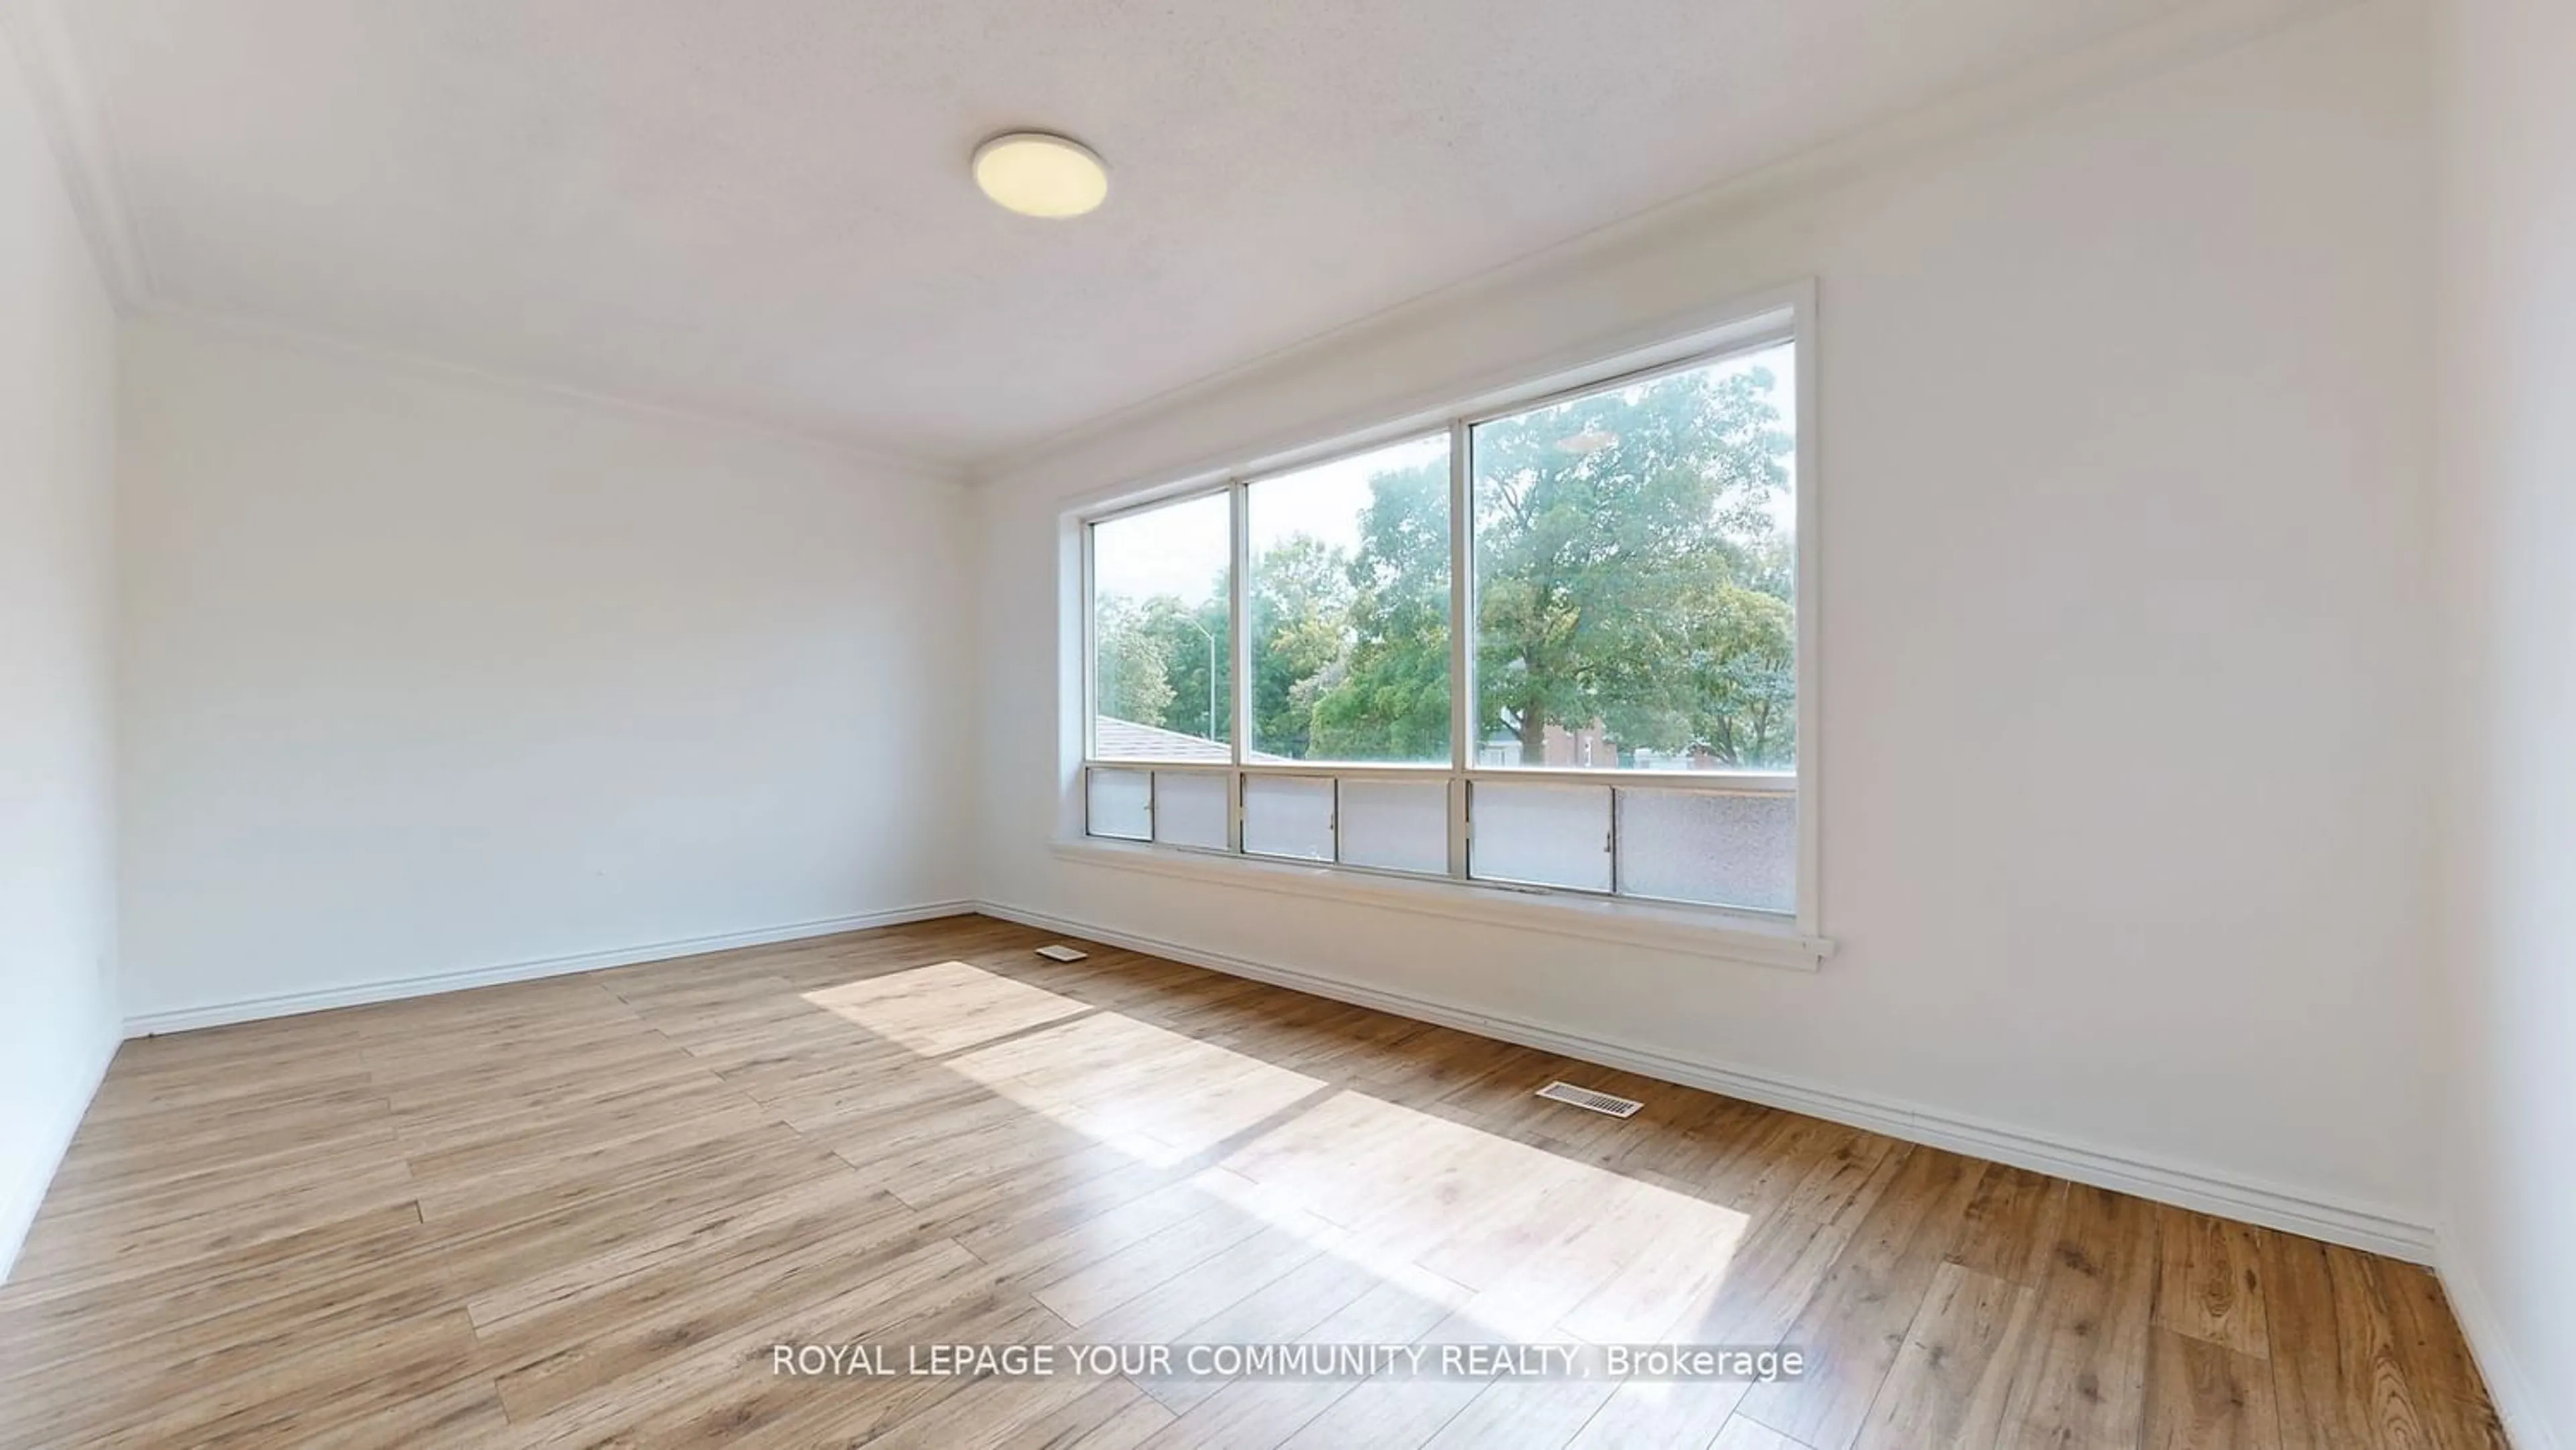 Other indoor space for 2669 Midland Ave, Toronto Ontario M1S 1R8